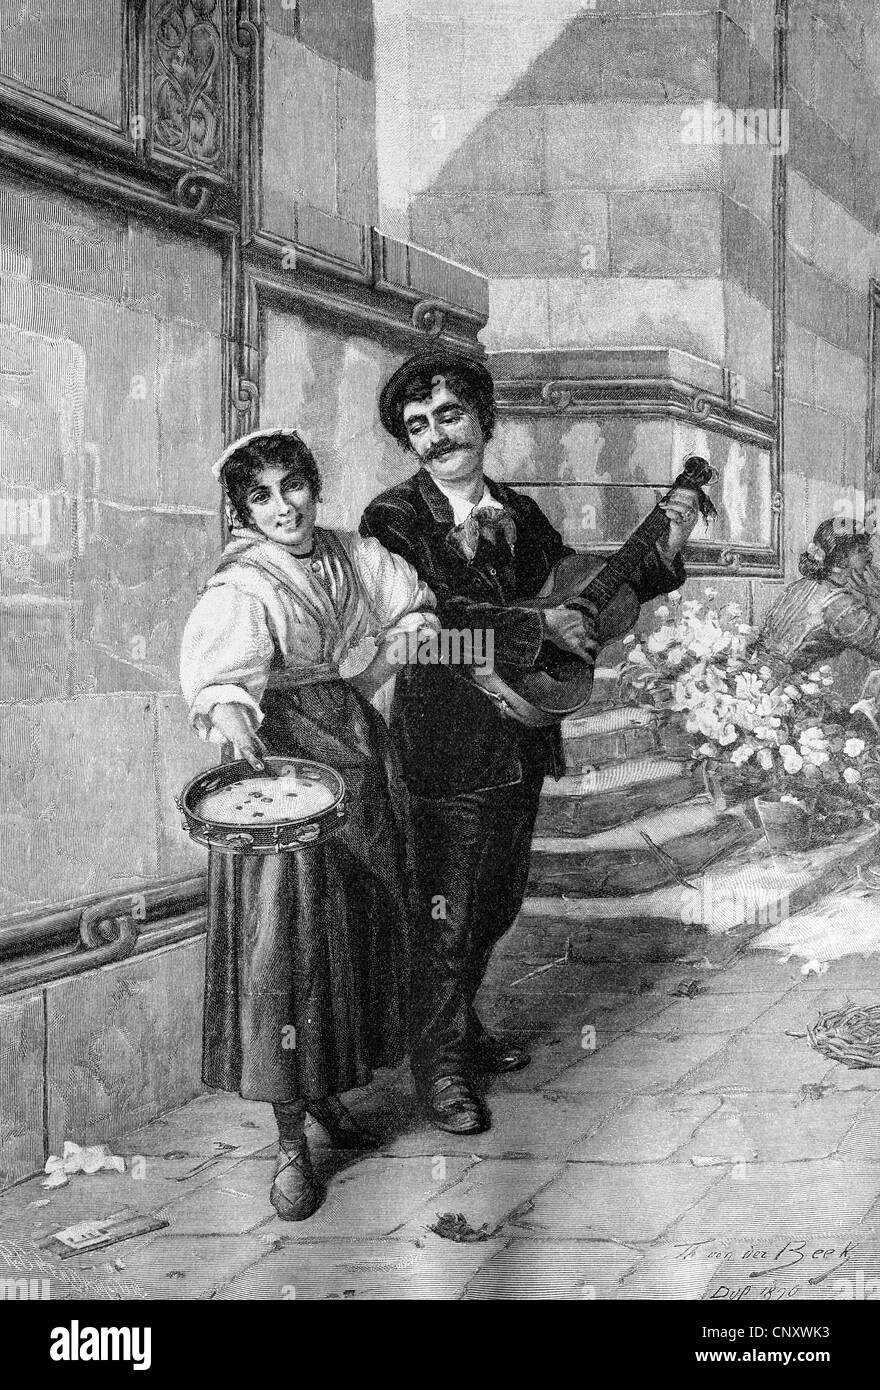 Italian street singers, historical wood engraving, about 1897 Stock Photo